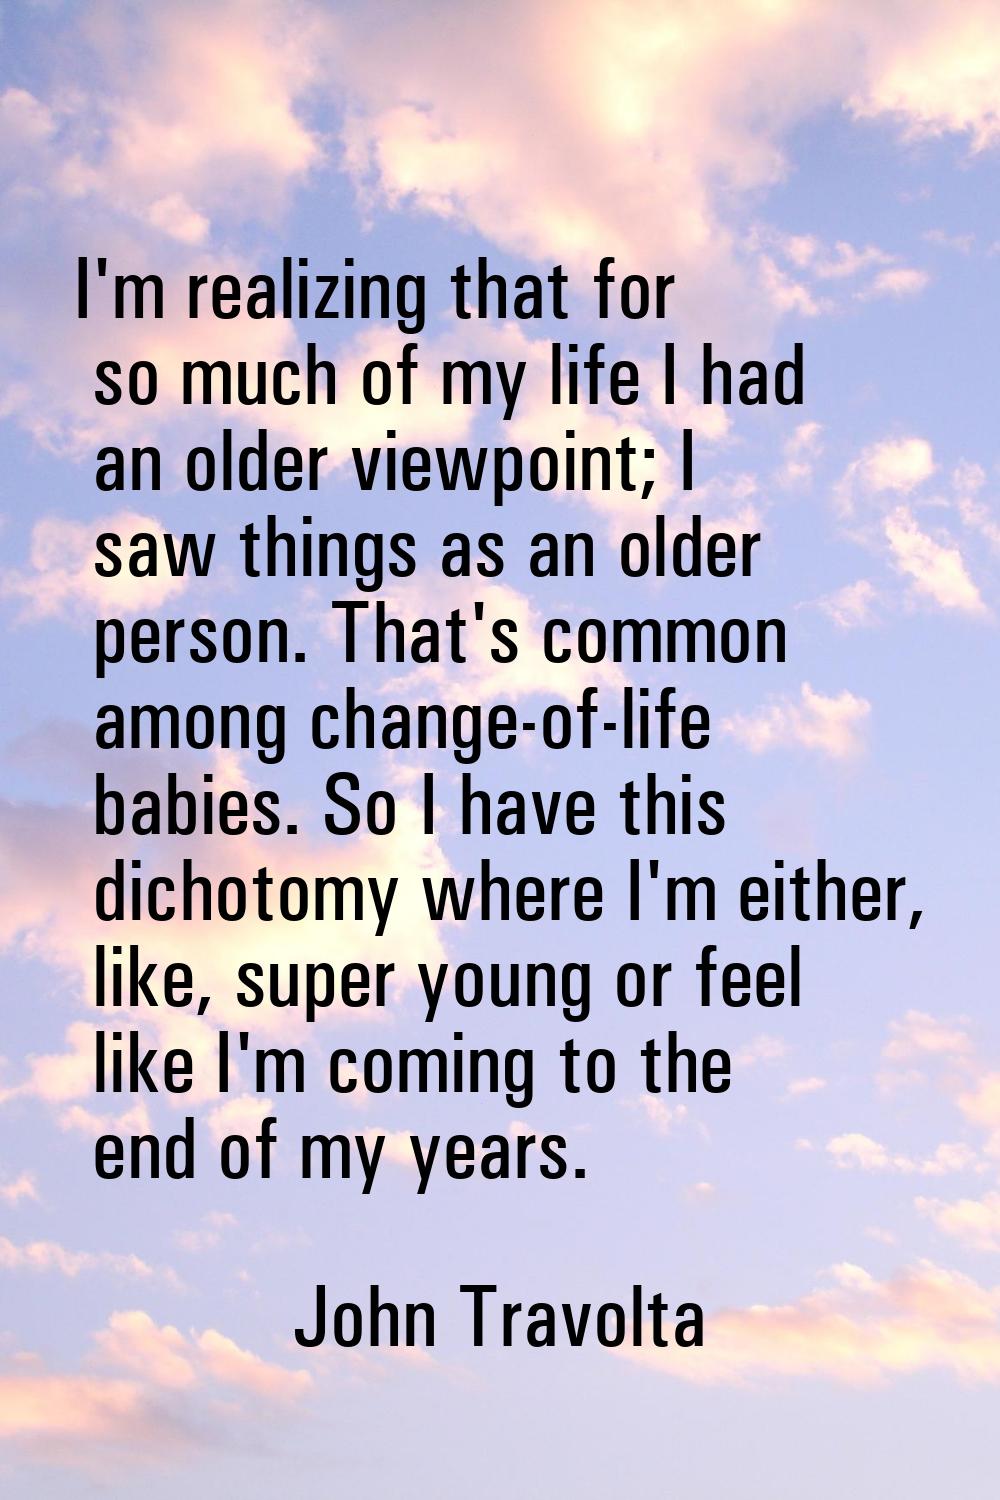 I'm realizing that for so much of my life I had an older viewpoint; I saw things as an older person